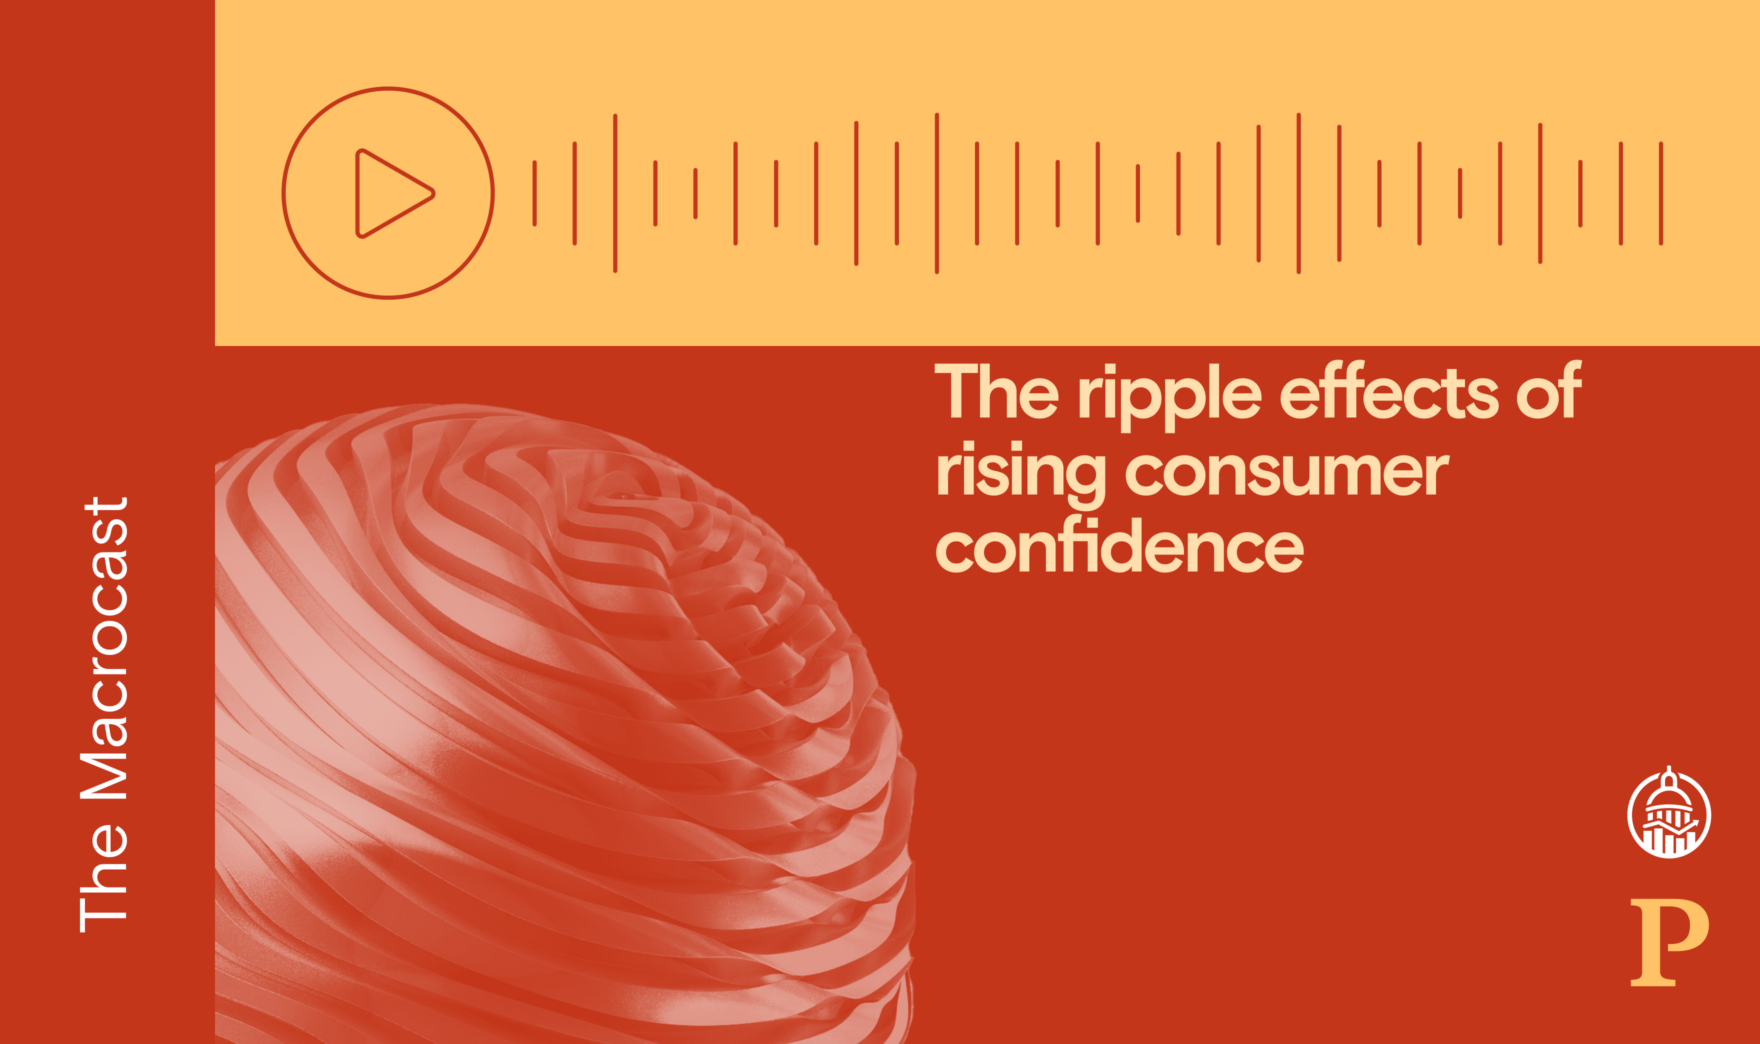 Macrocast: The ripple effects of rising consumer confidence